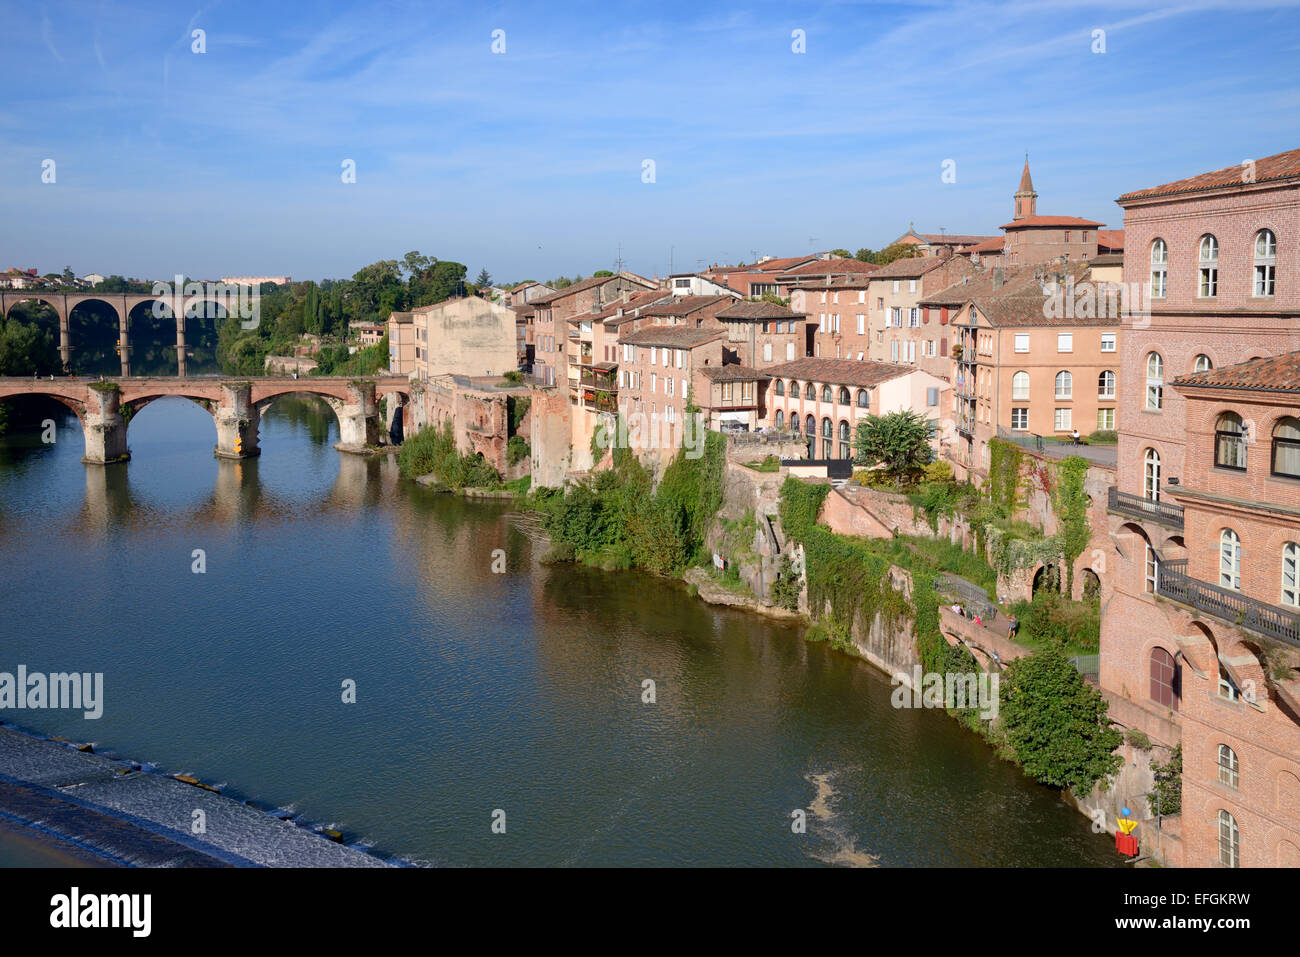 View of the Old Town & River Tarn Albi France Stock Photo